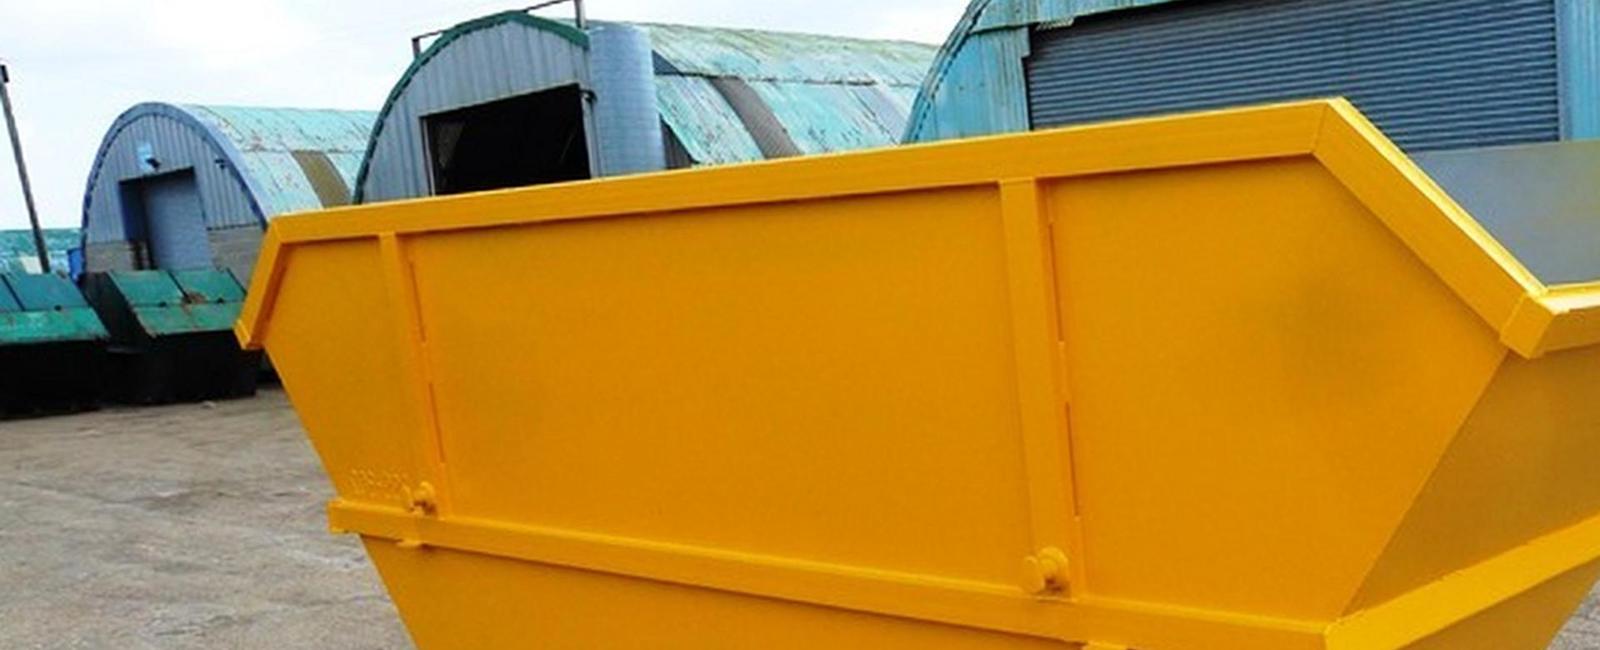 Skip Bins Hire Help In Large Scale Waste Management